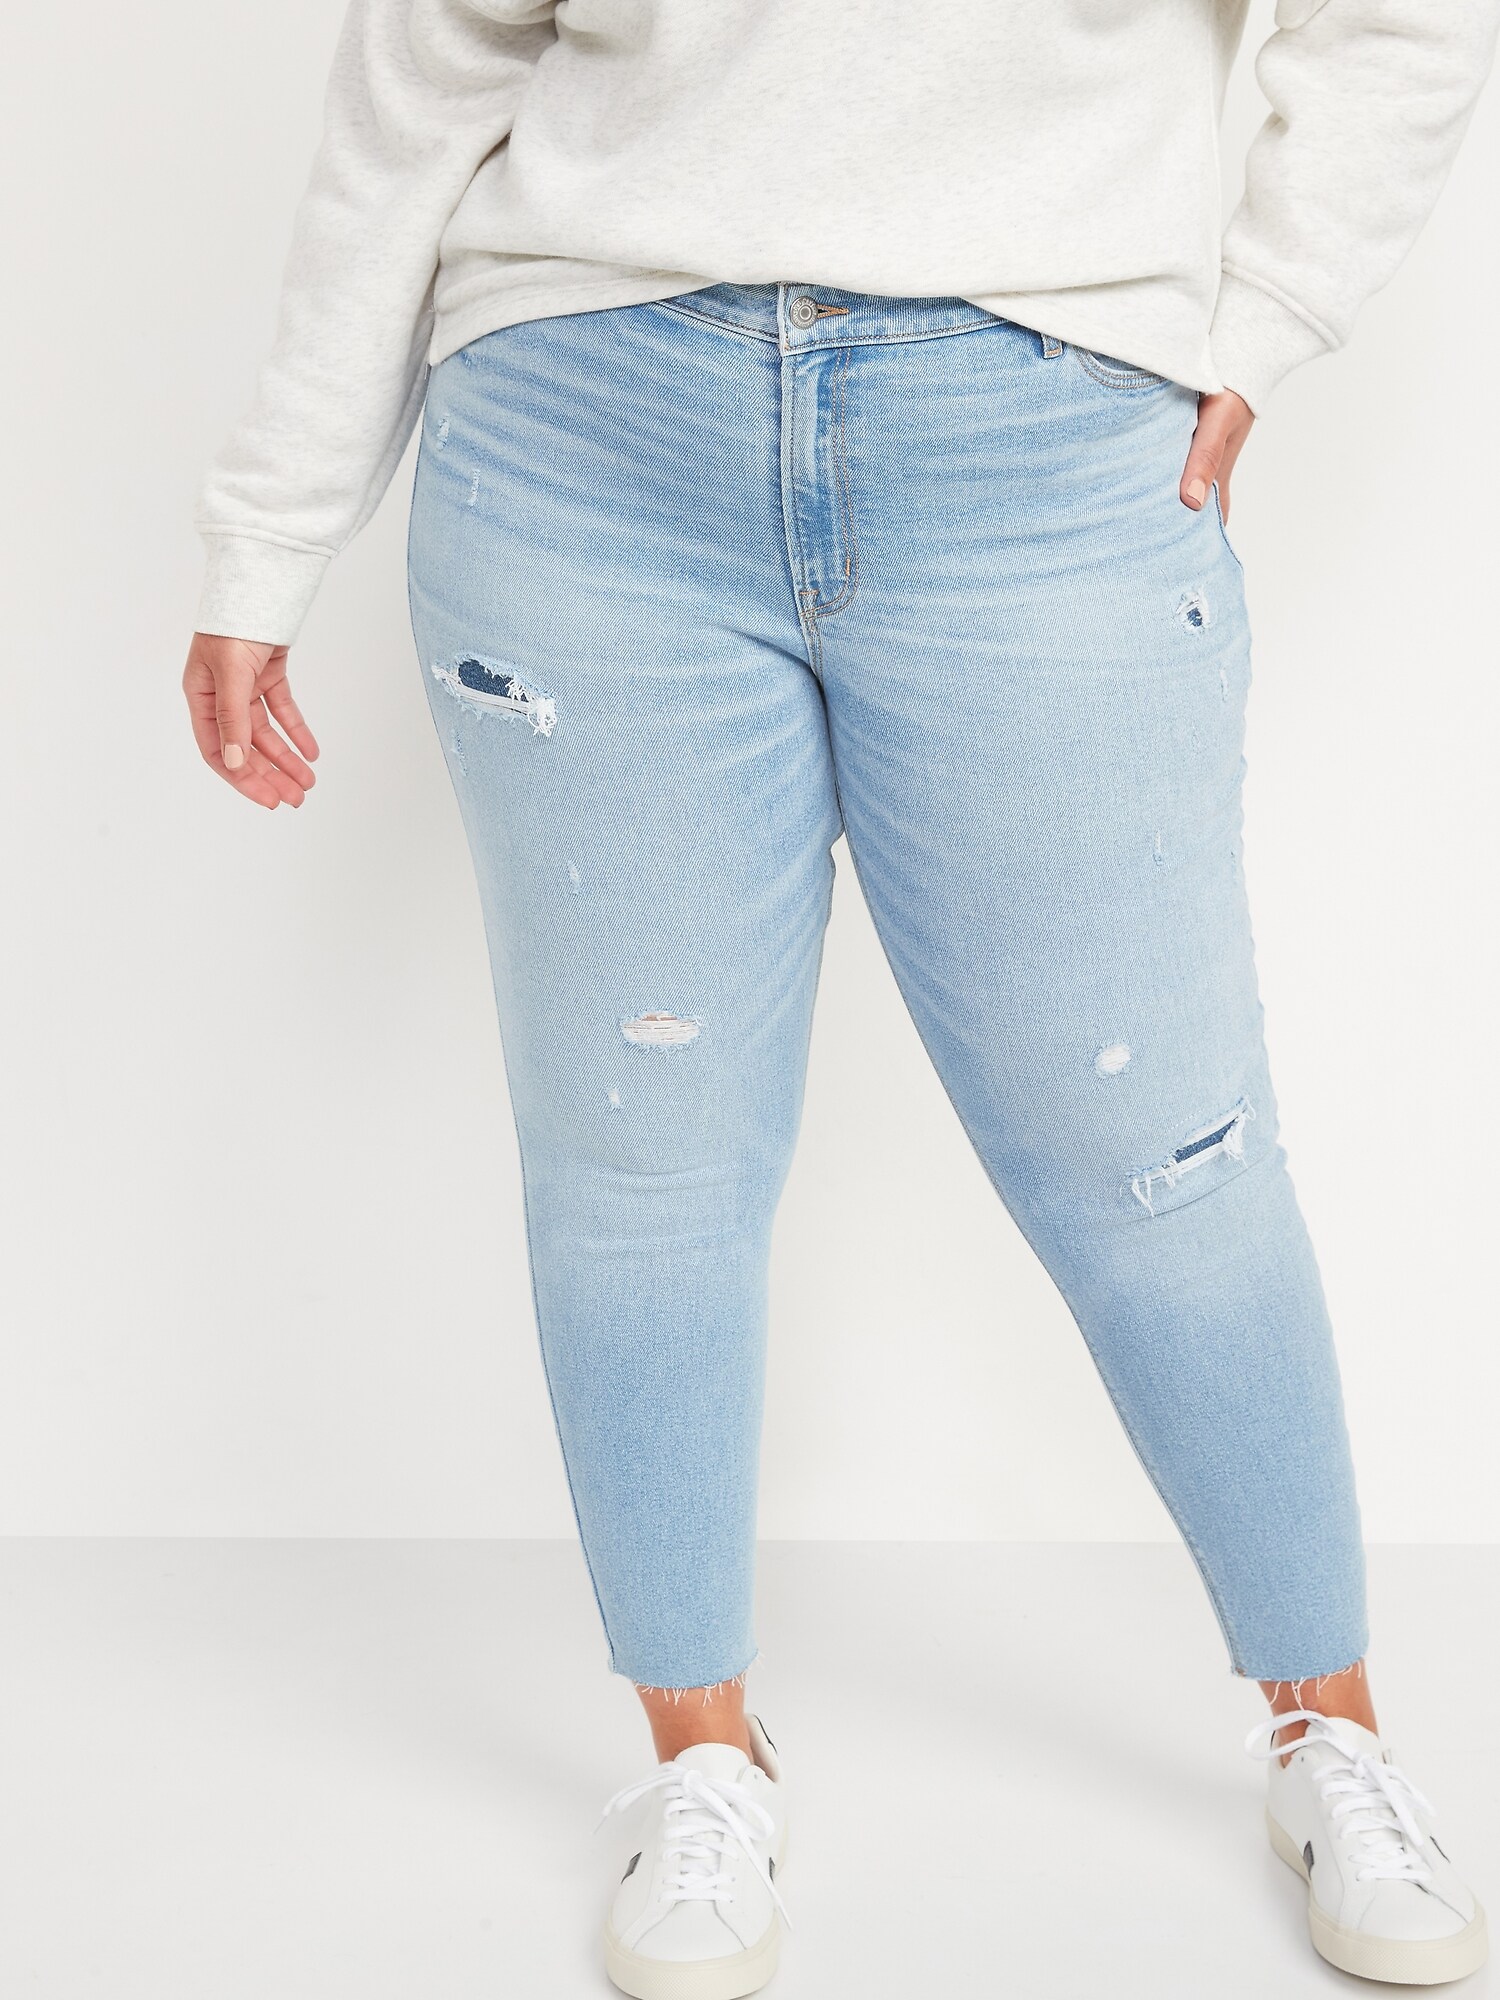 Mid Rise Rockstar Super Skinny Ripped Ankle Jeans For Women Old Navy